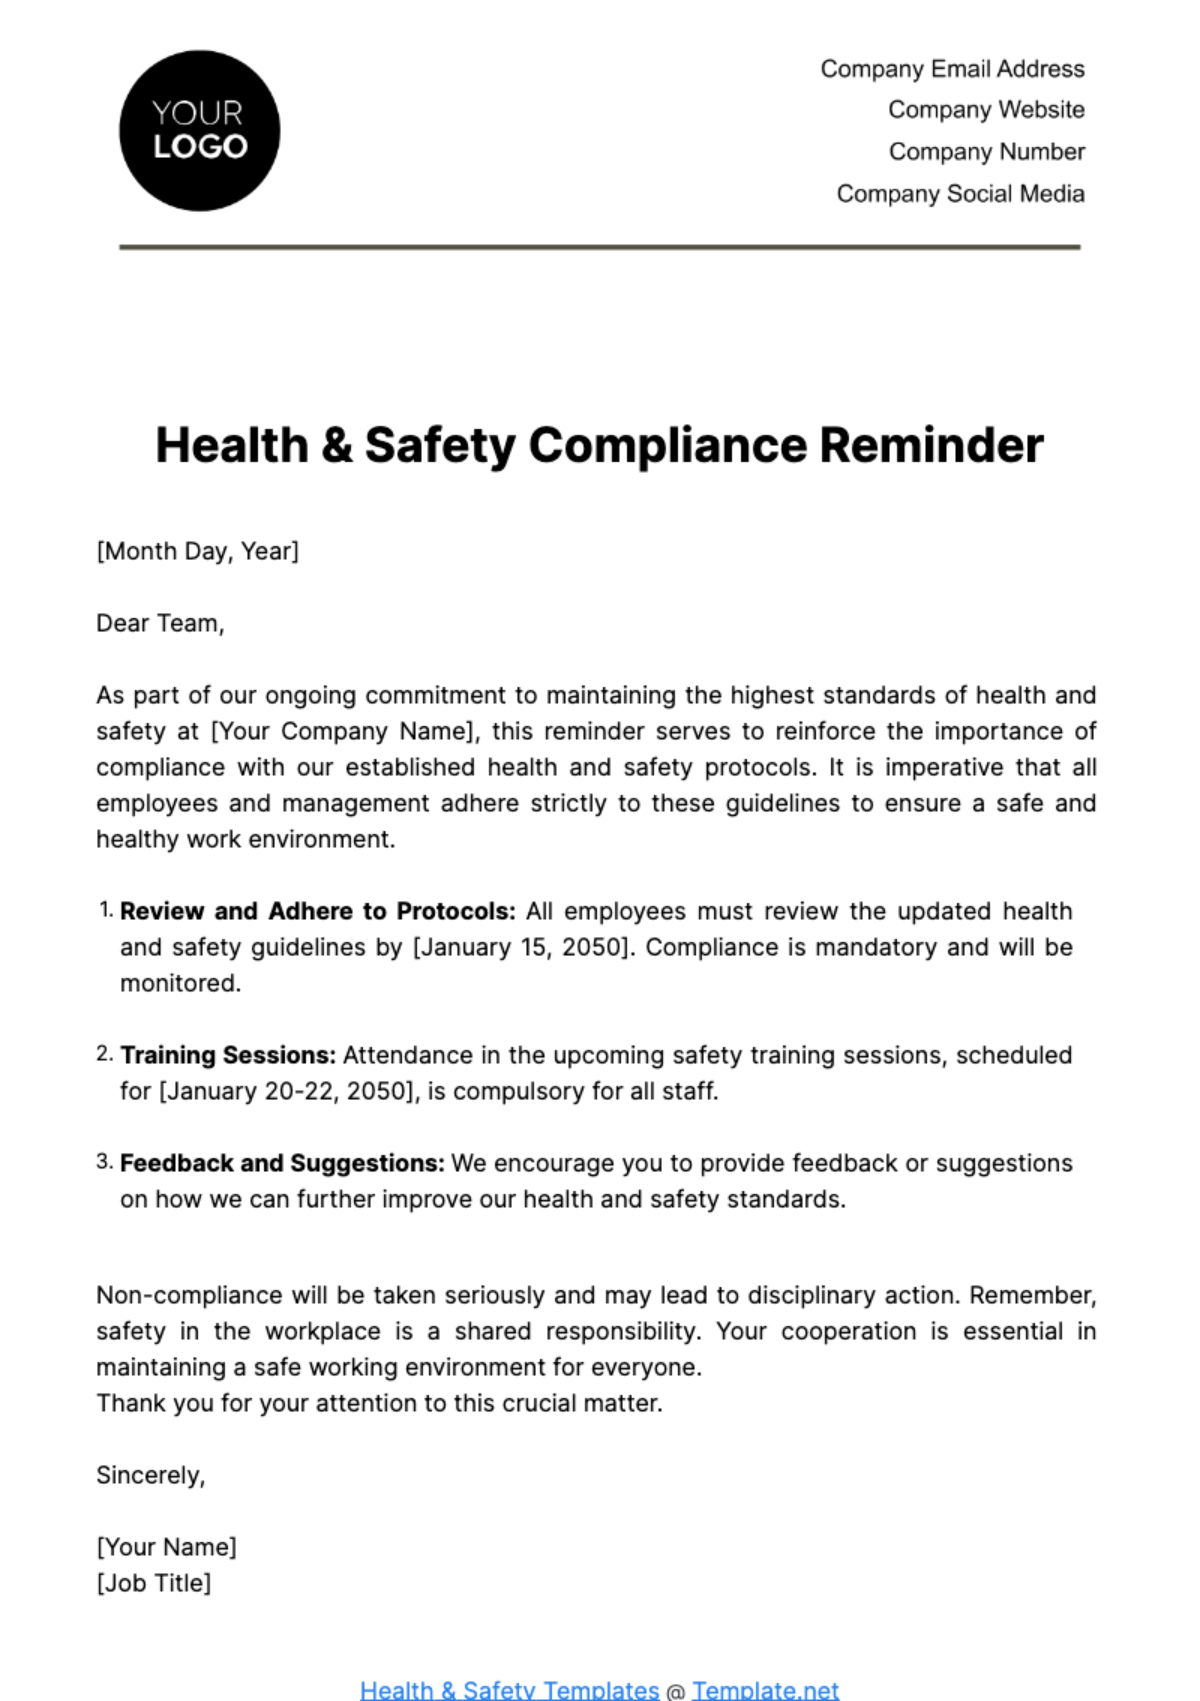 Free Health & Safety Compliance Reminder Template